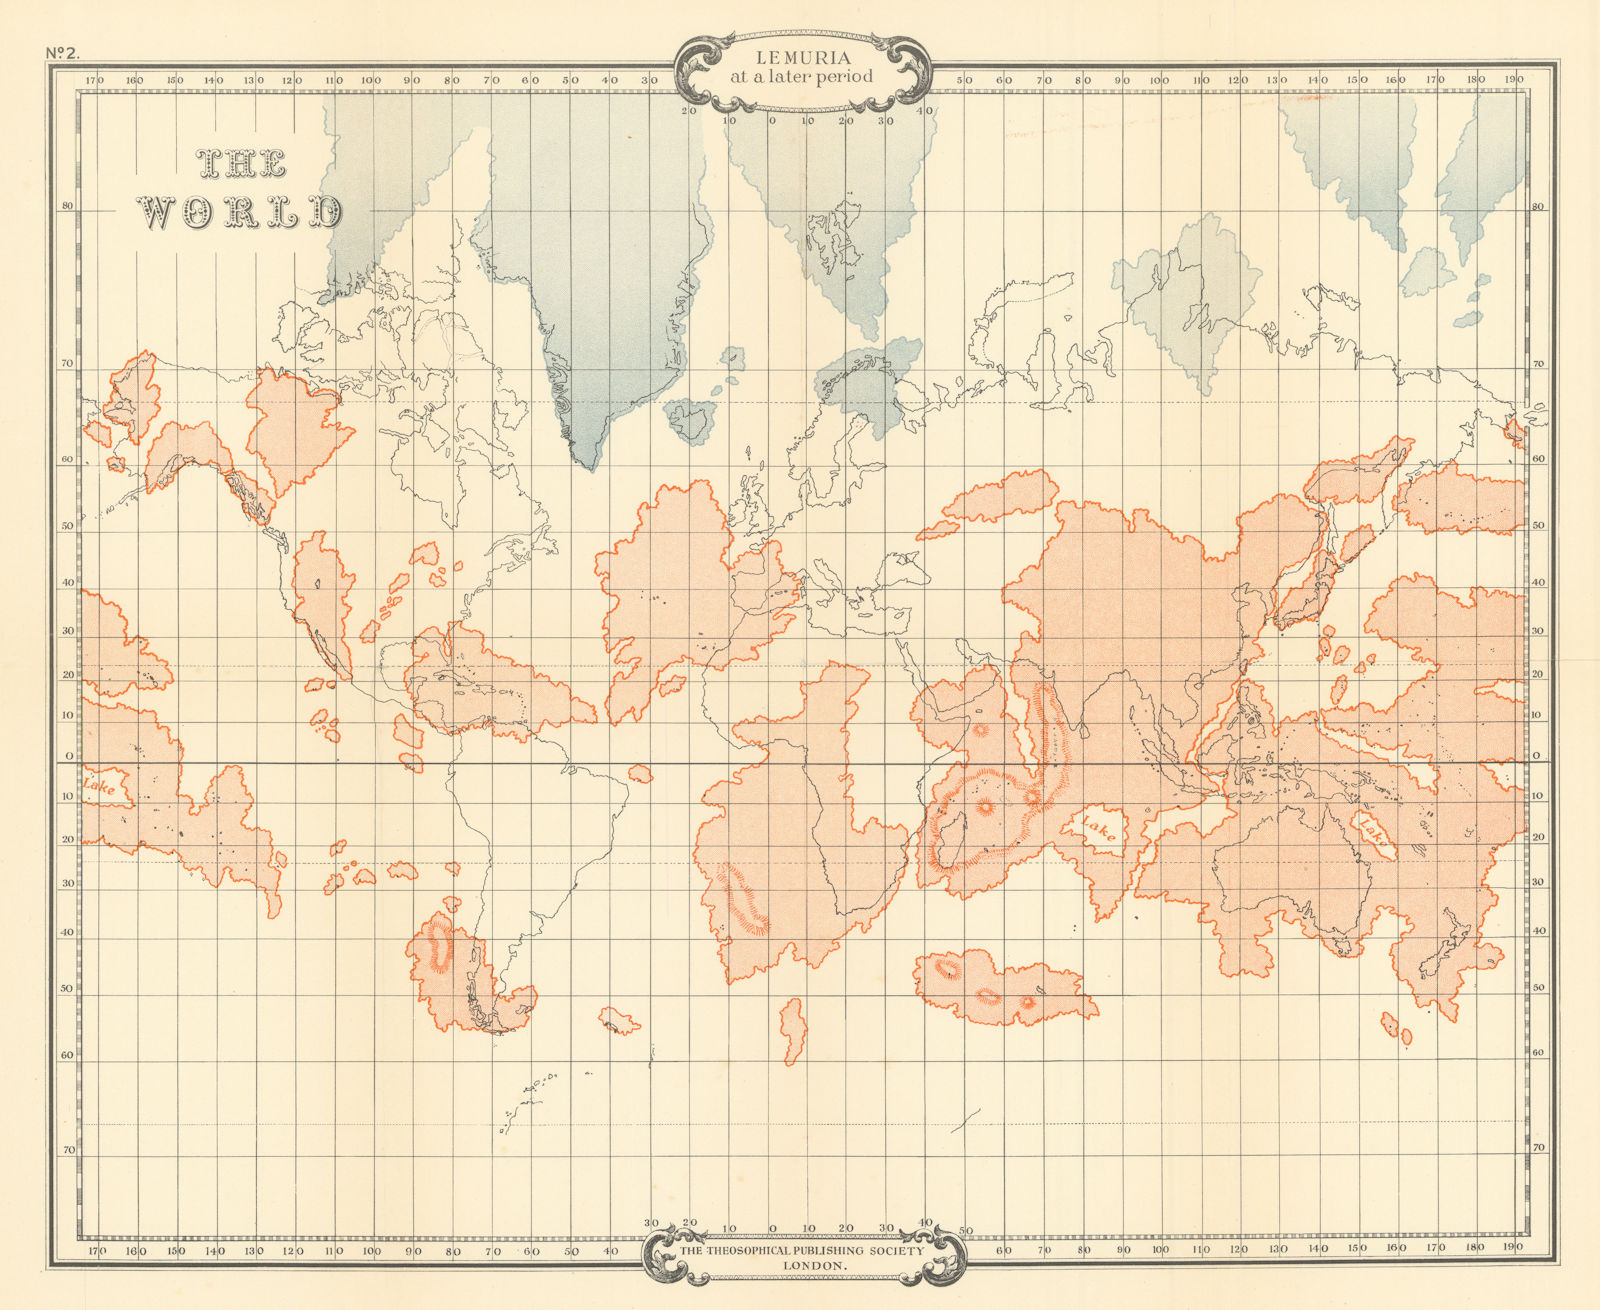 Associate Product The World showing Lemuria at a later period. SCOTT-ELLIOT 1925 old vintage map